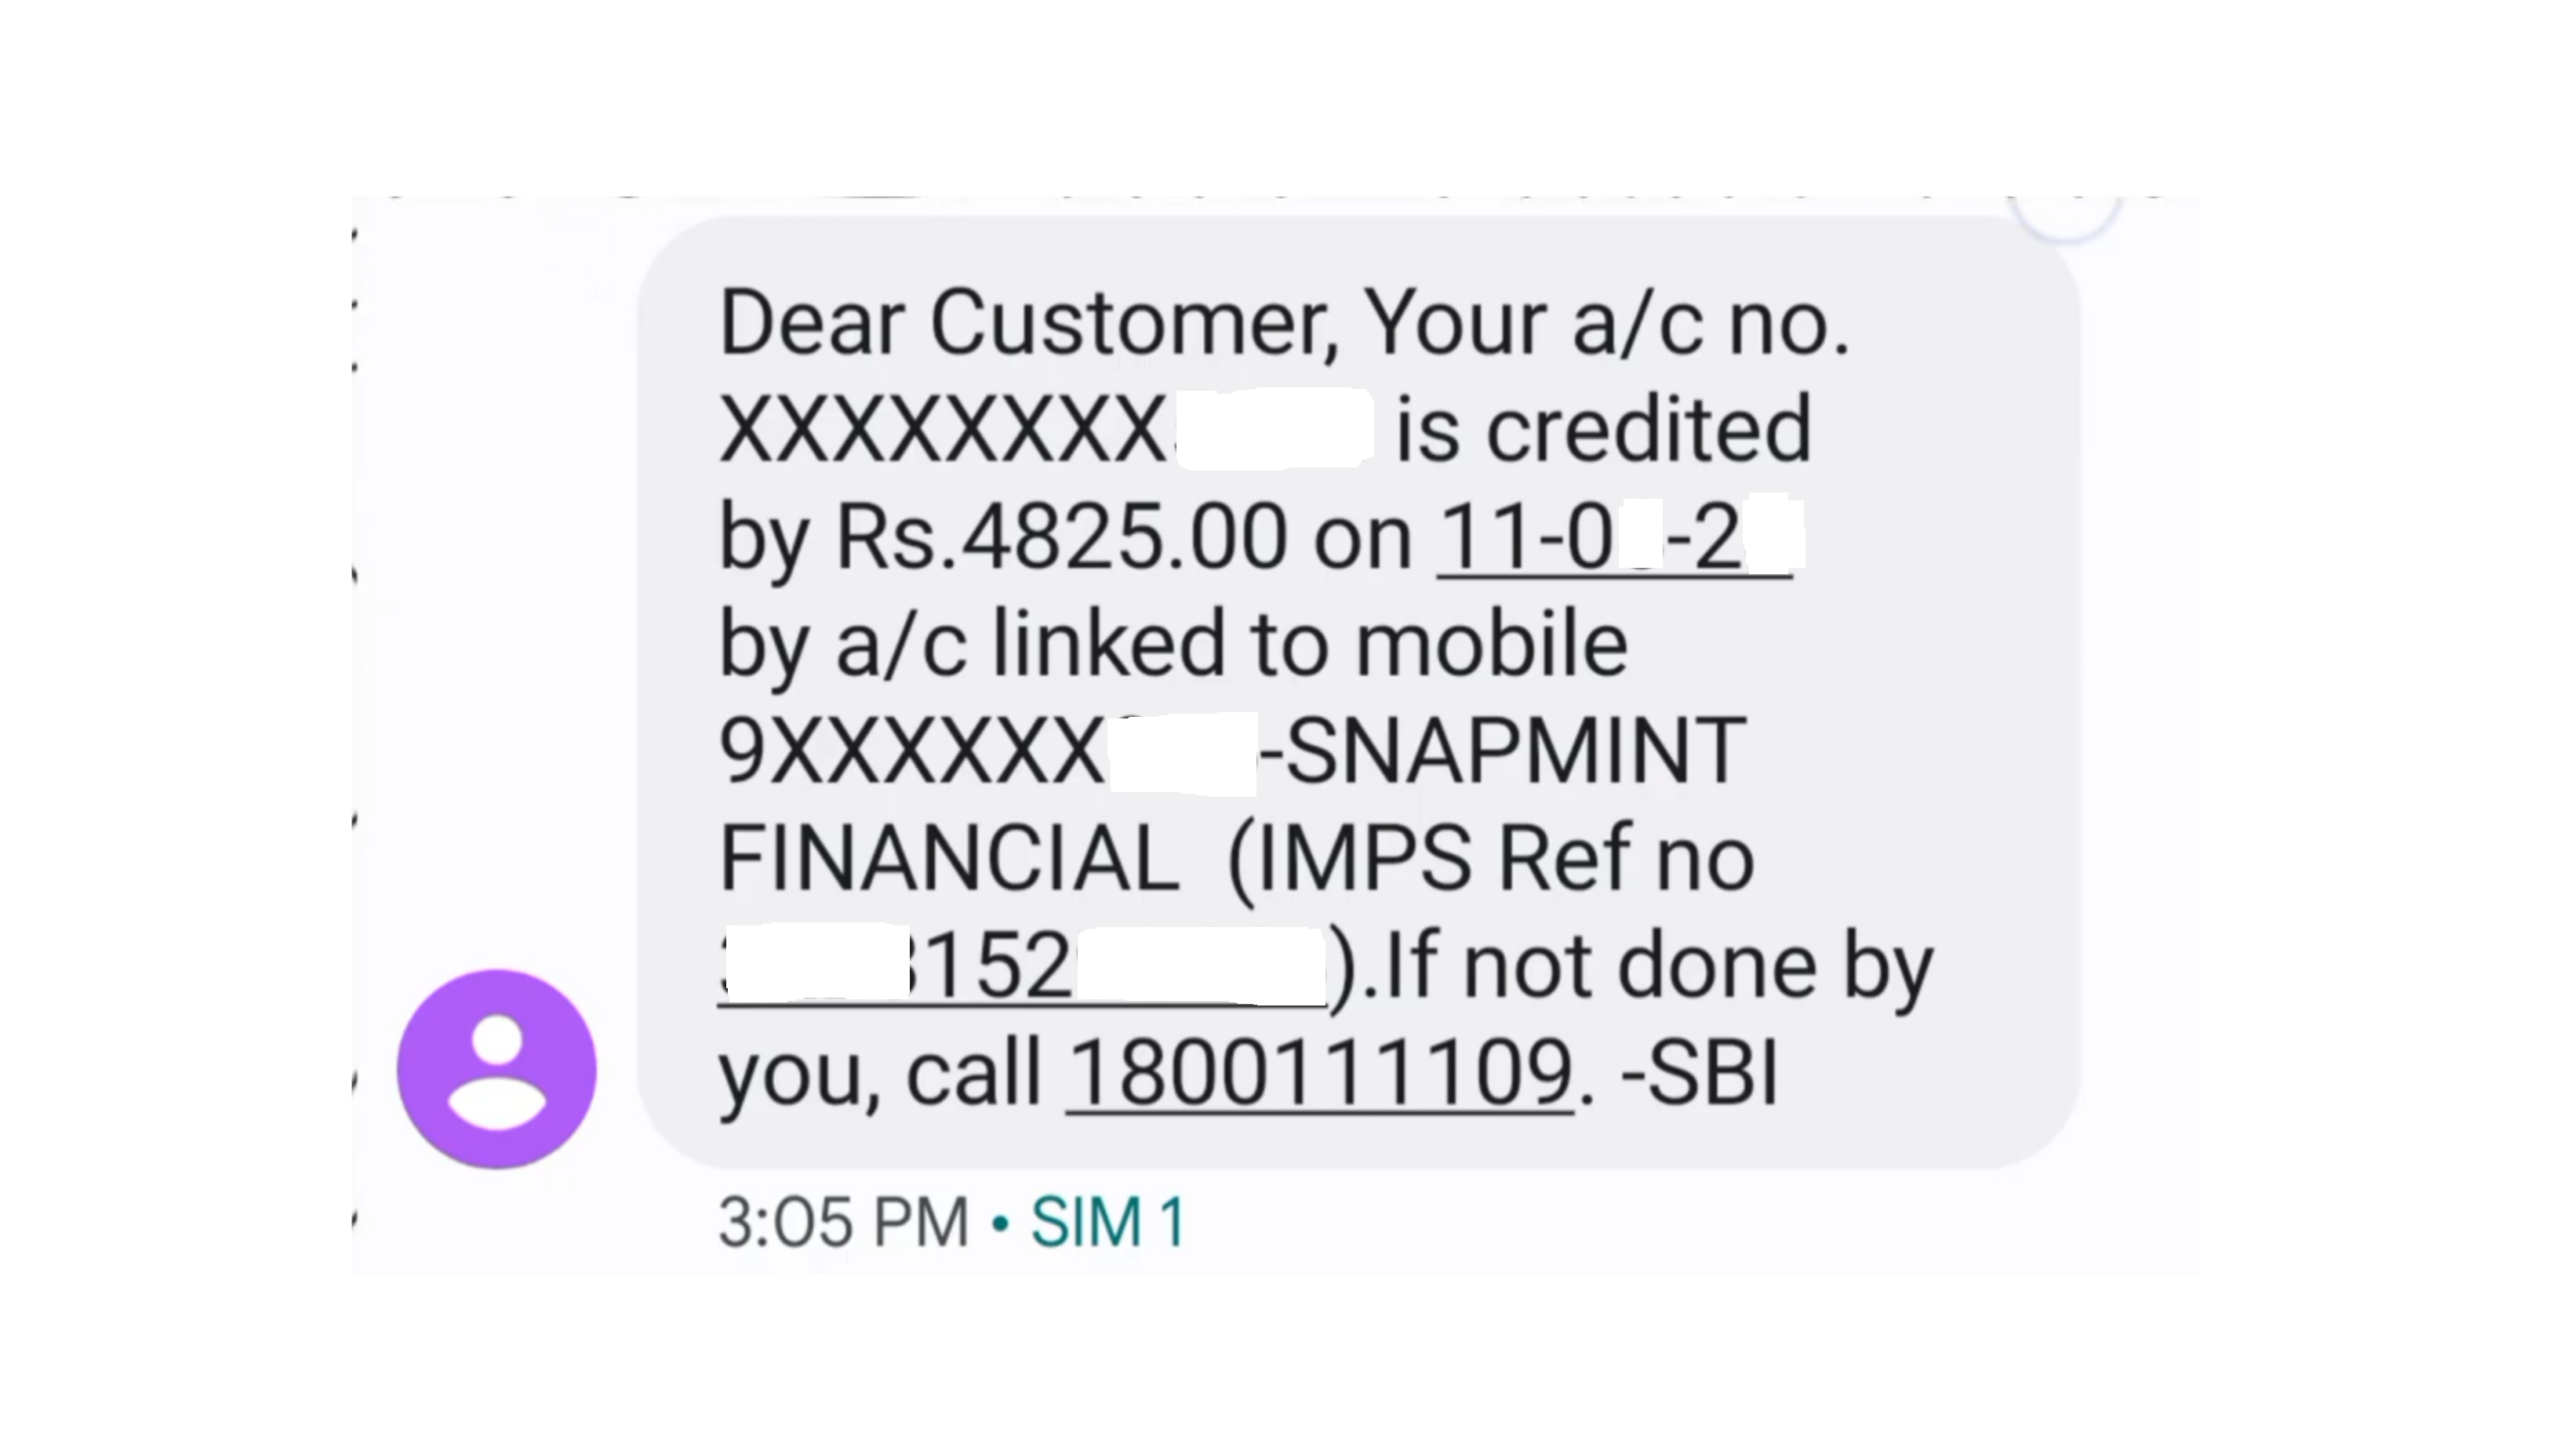 Now you see msg of loan amount